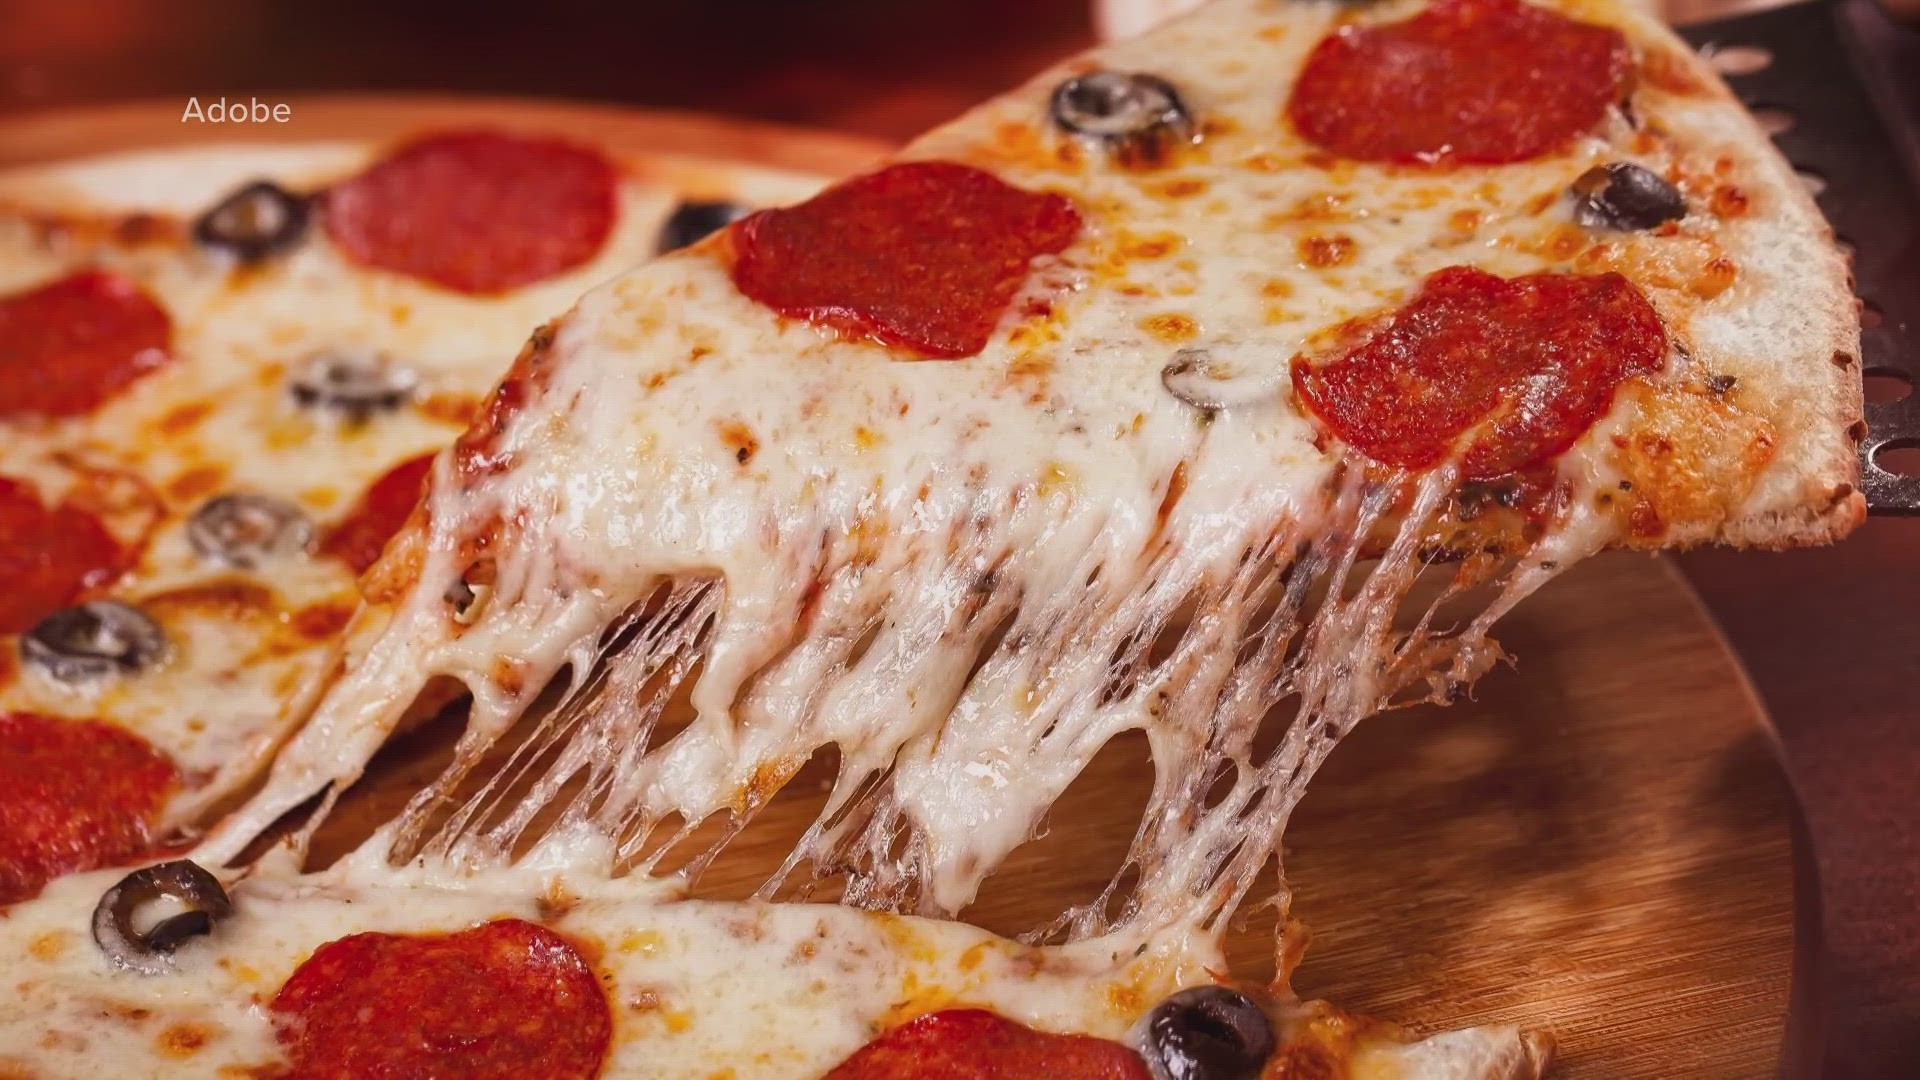 In honor of Pi Day, some restaurants and chains are offering deals on both pie and pizza.